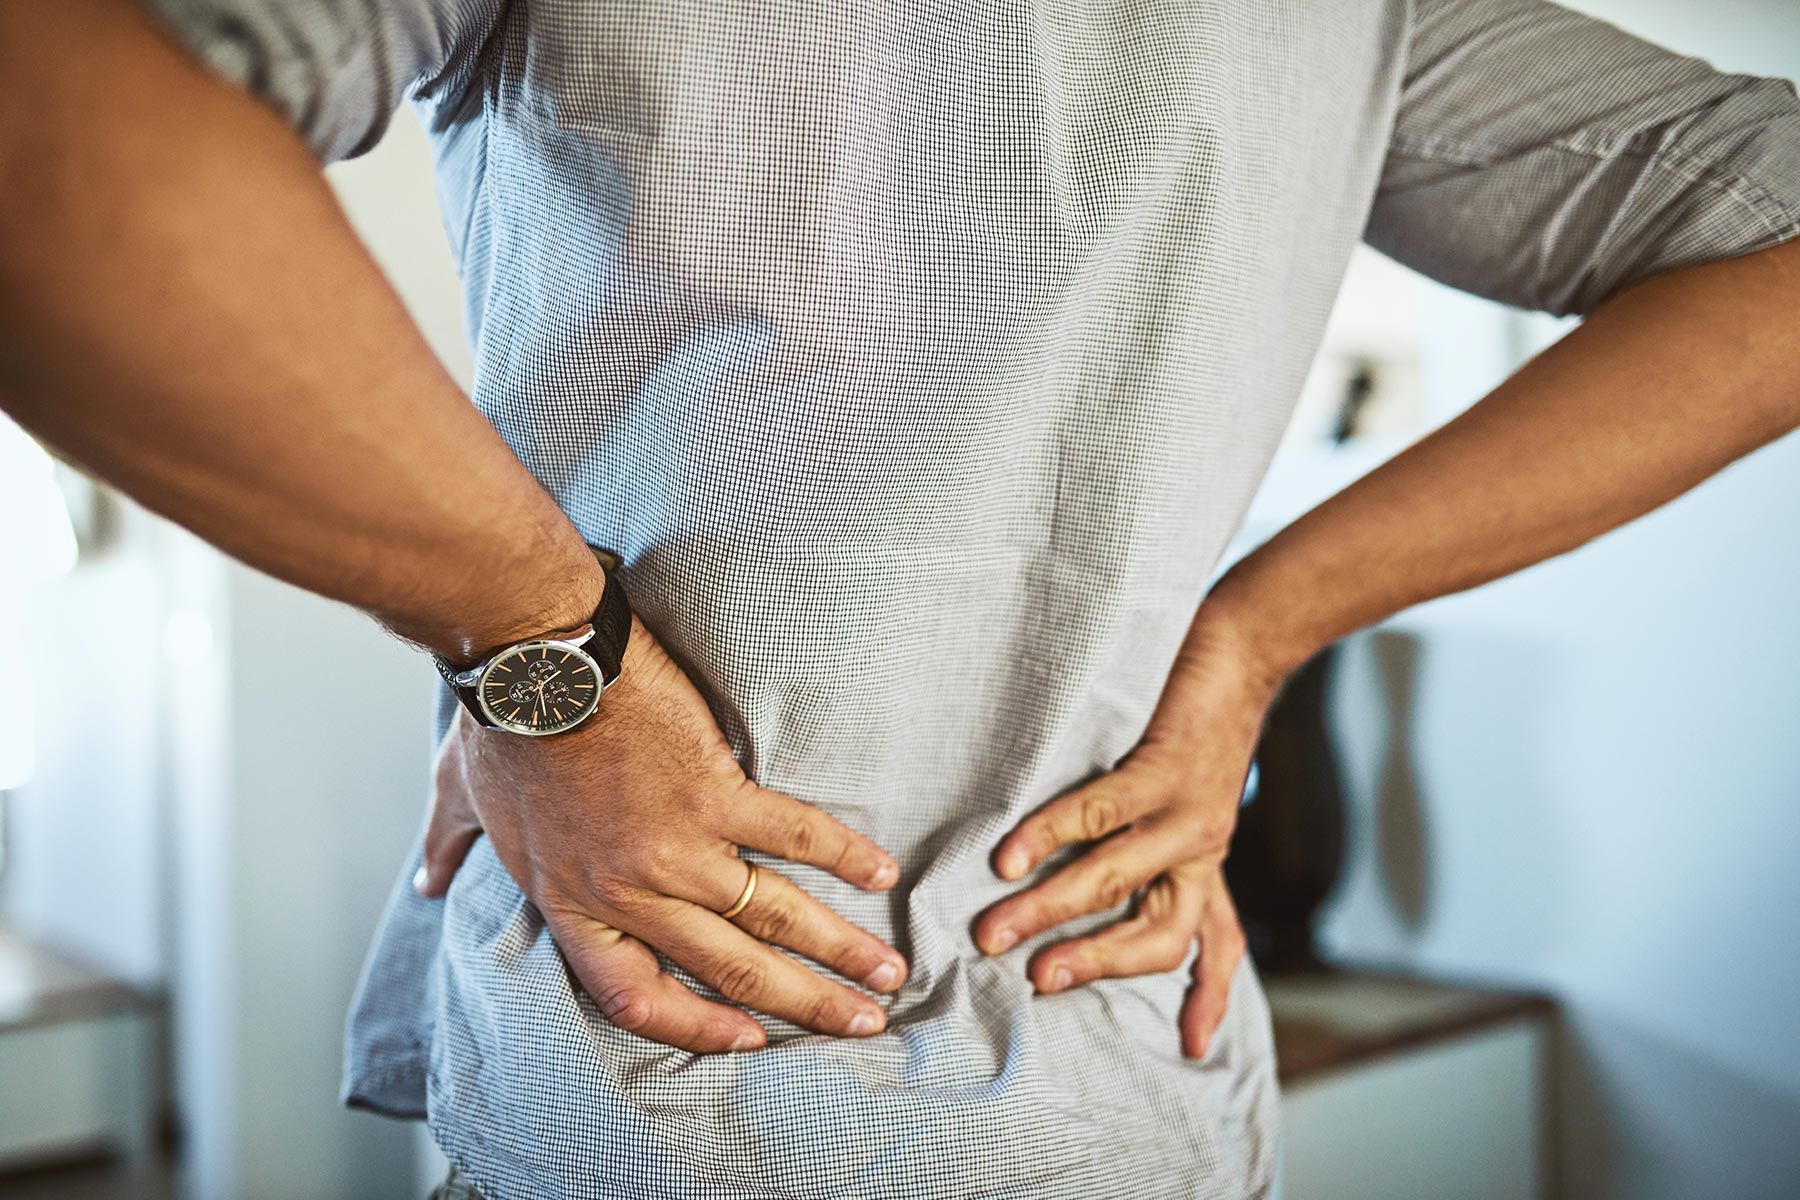 Home Remedies for Lower Back Pain